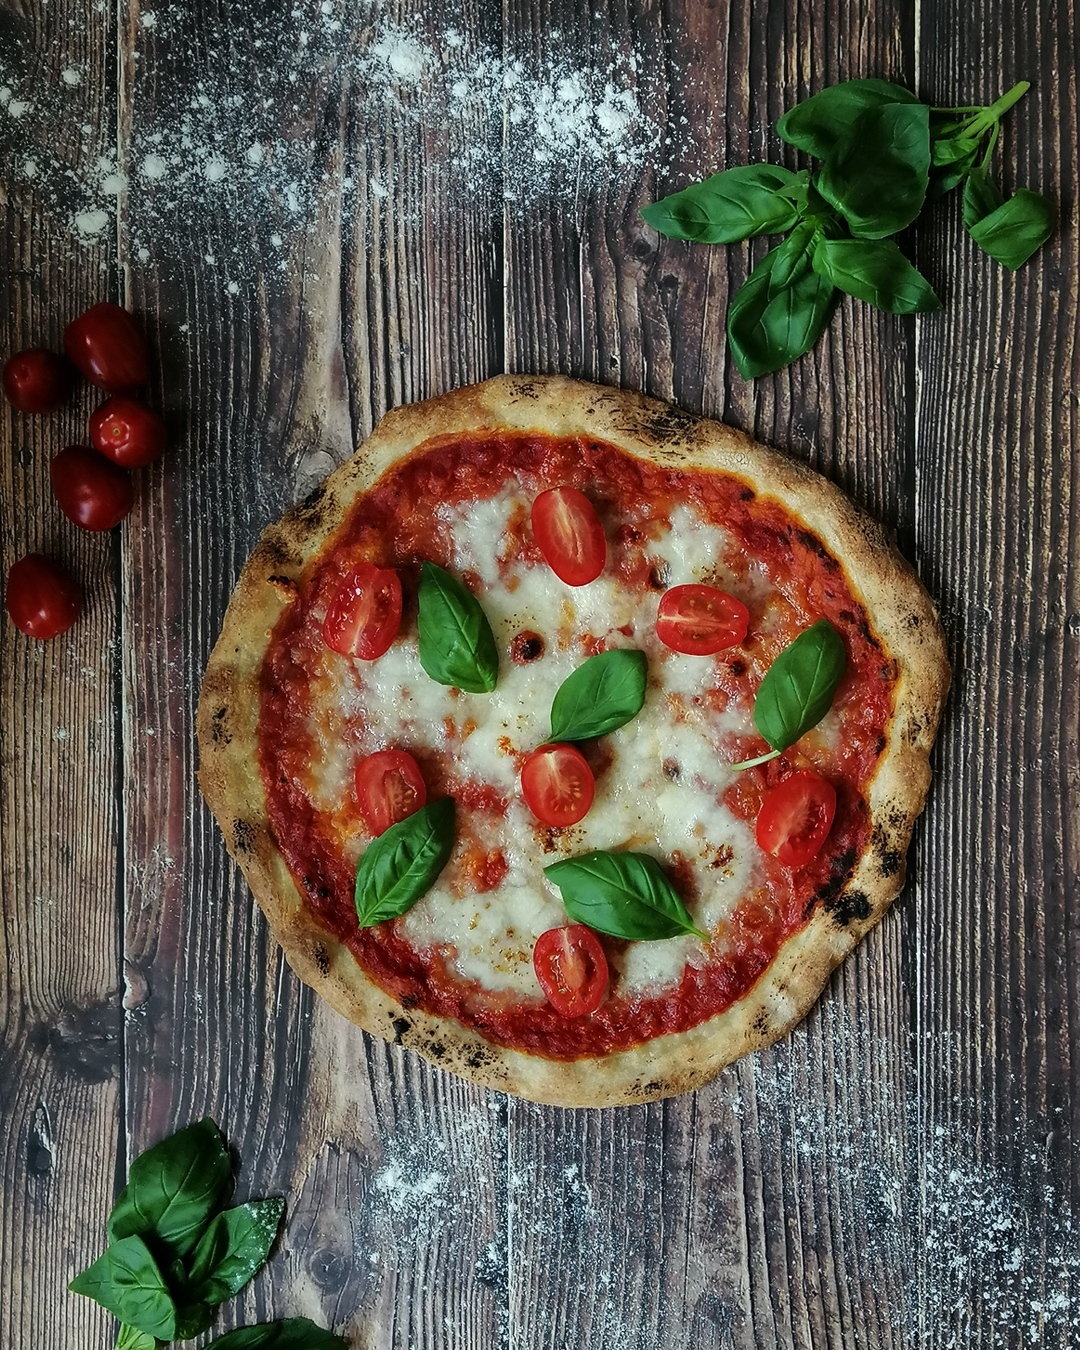 Charred thin crust pizza margherita with fresh cherry tomatoes and basil leaves